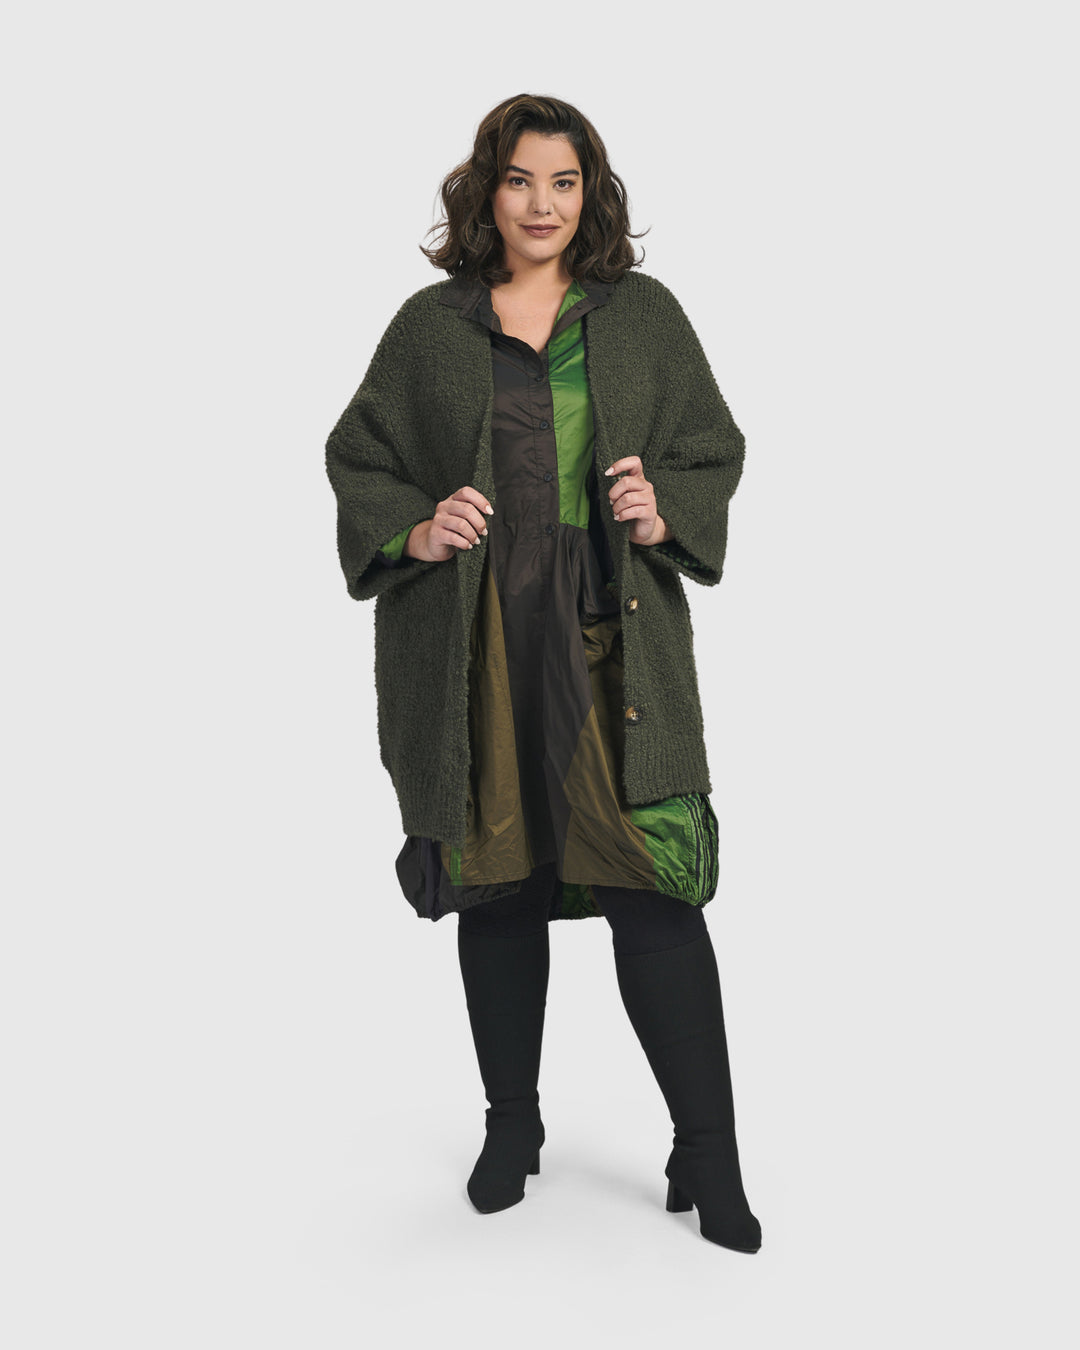 A plus size woman wearing a cozy green Sunday Cardigan from ALEMBIKA.